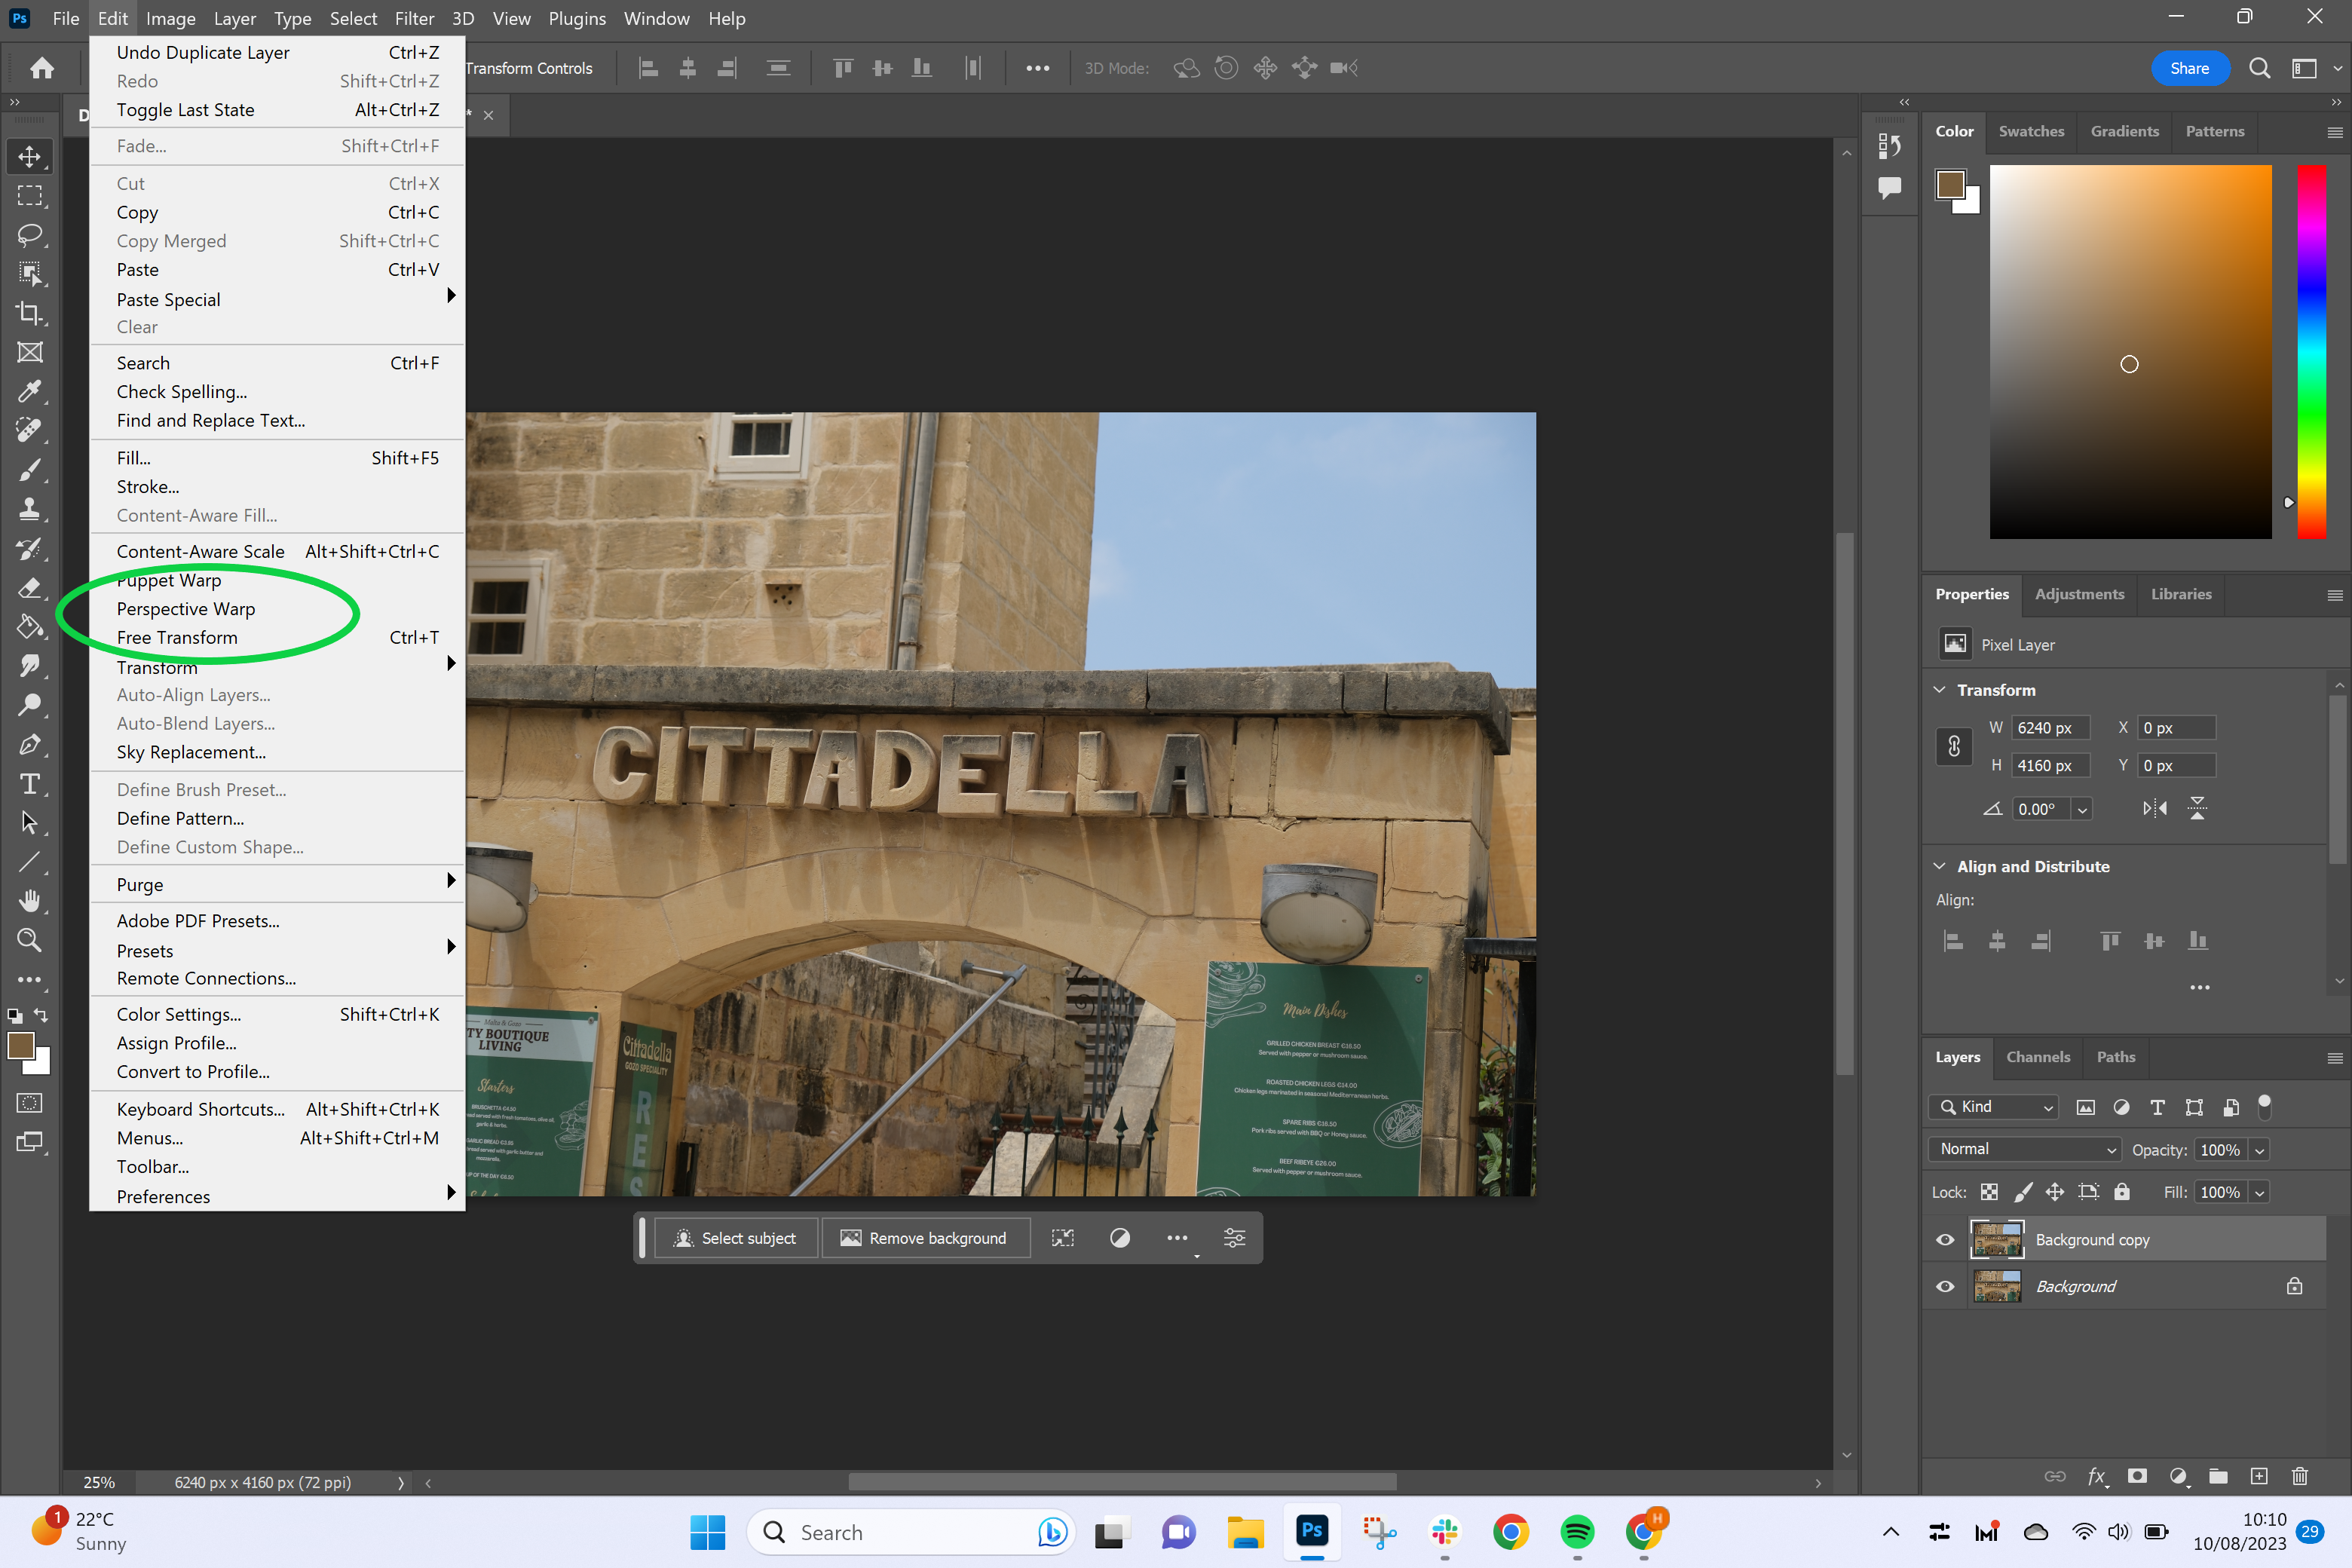 How to use Perspective Warp in Photoshop